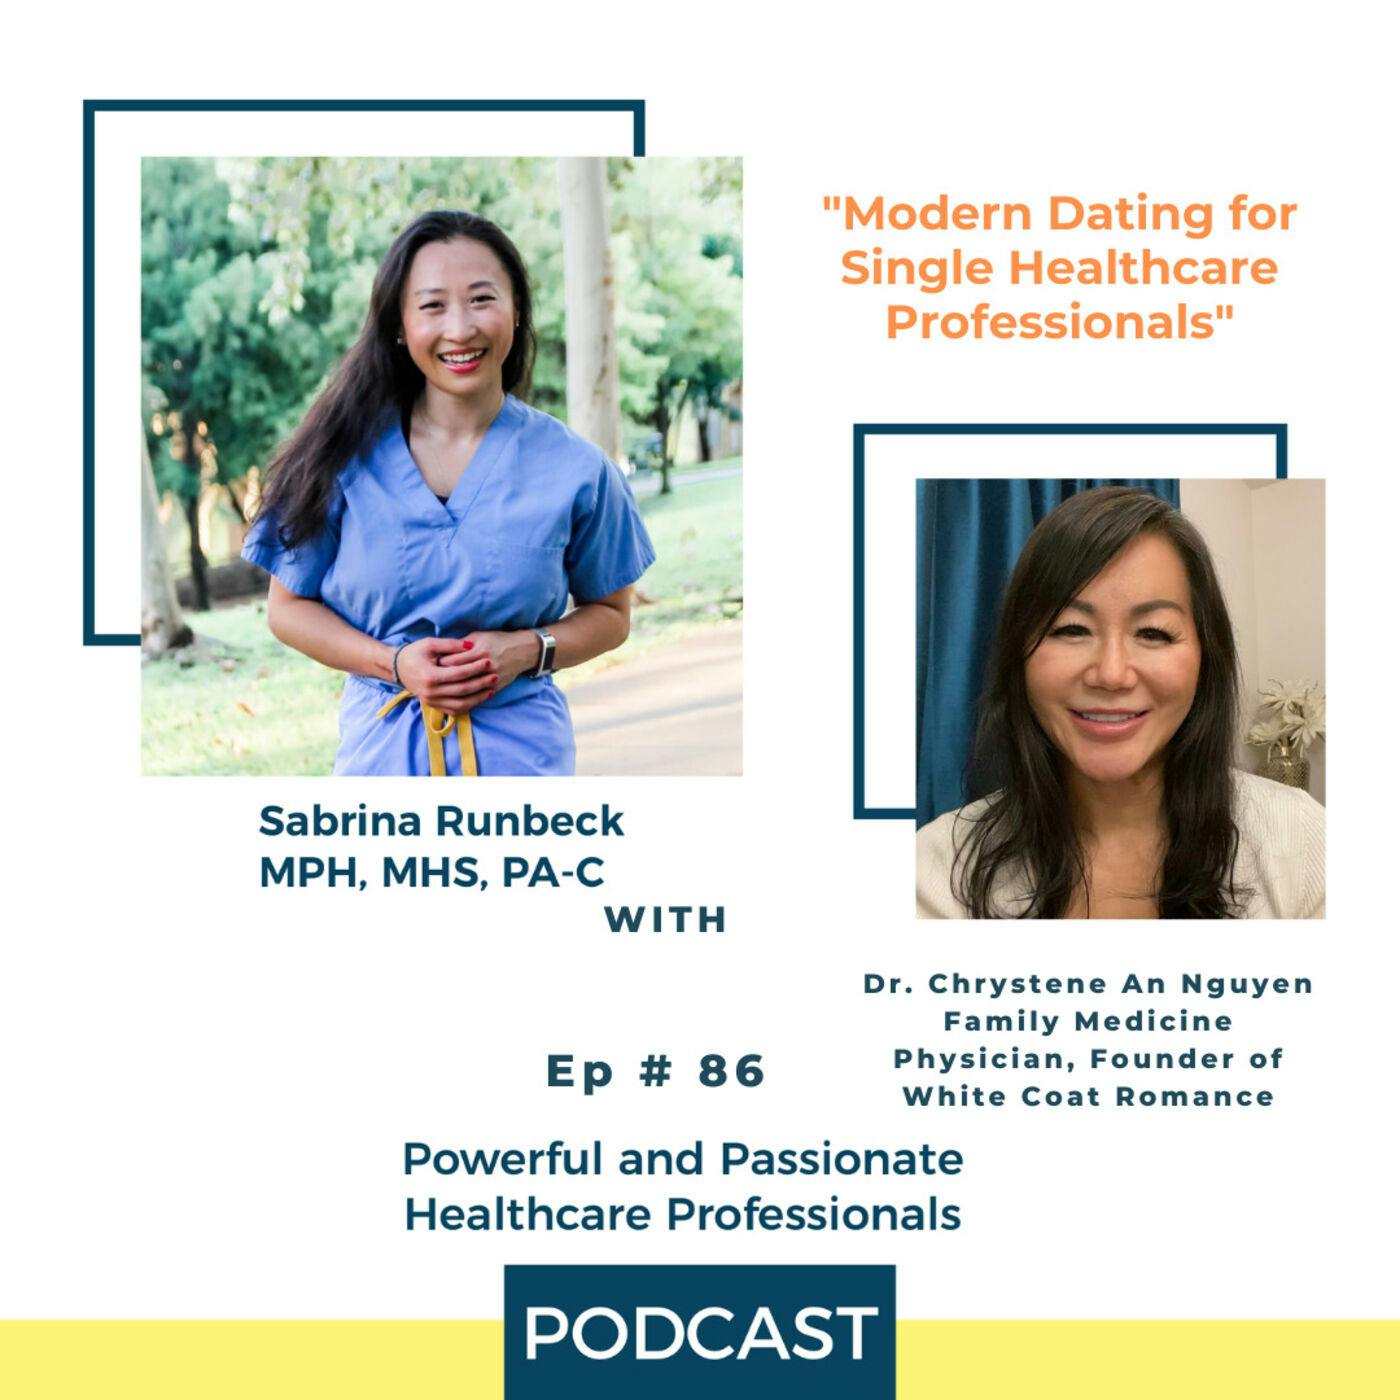 Ep 86 – Modern Dating for Single Healthcare Professionals with Dr. Chrystene An Nguyen